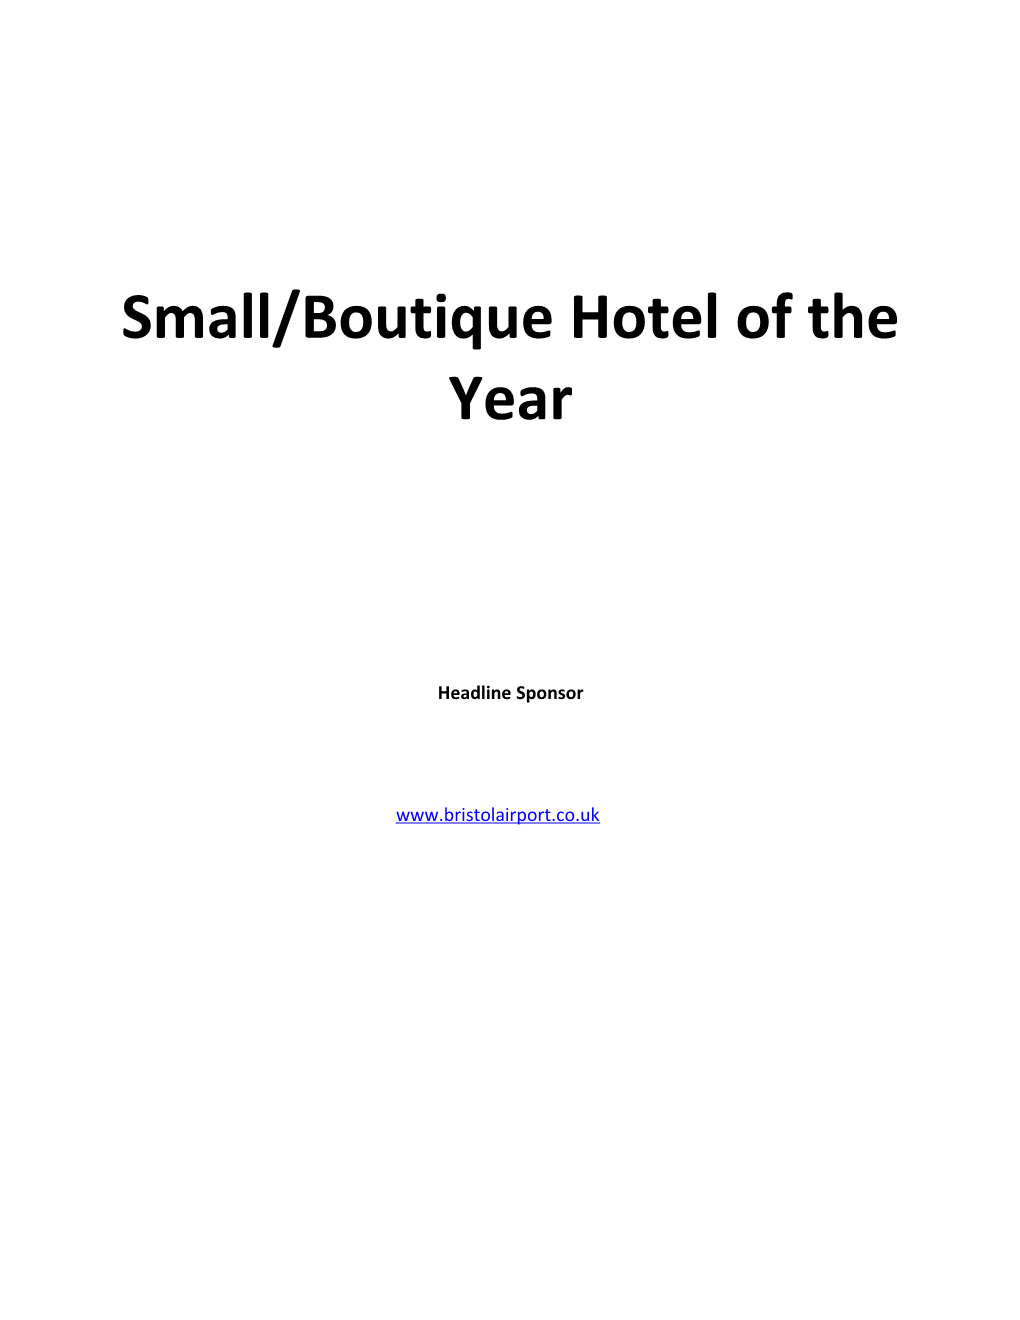 Small/Boutique Hotel of the Year